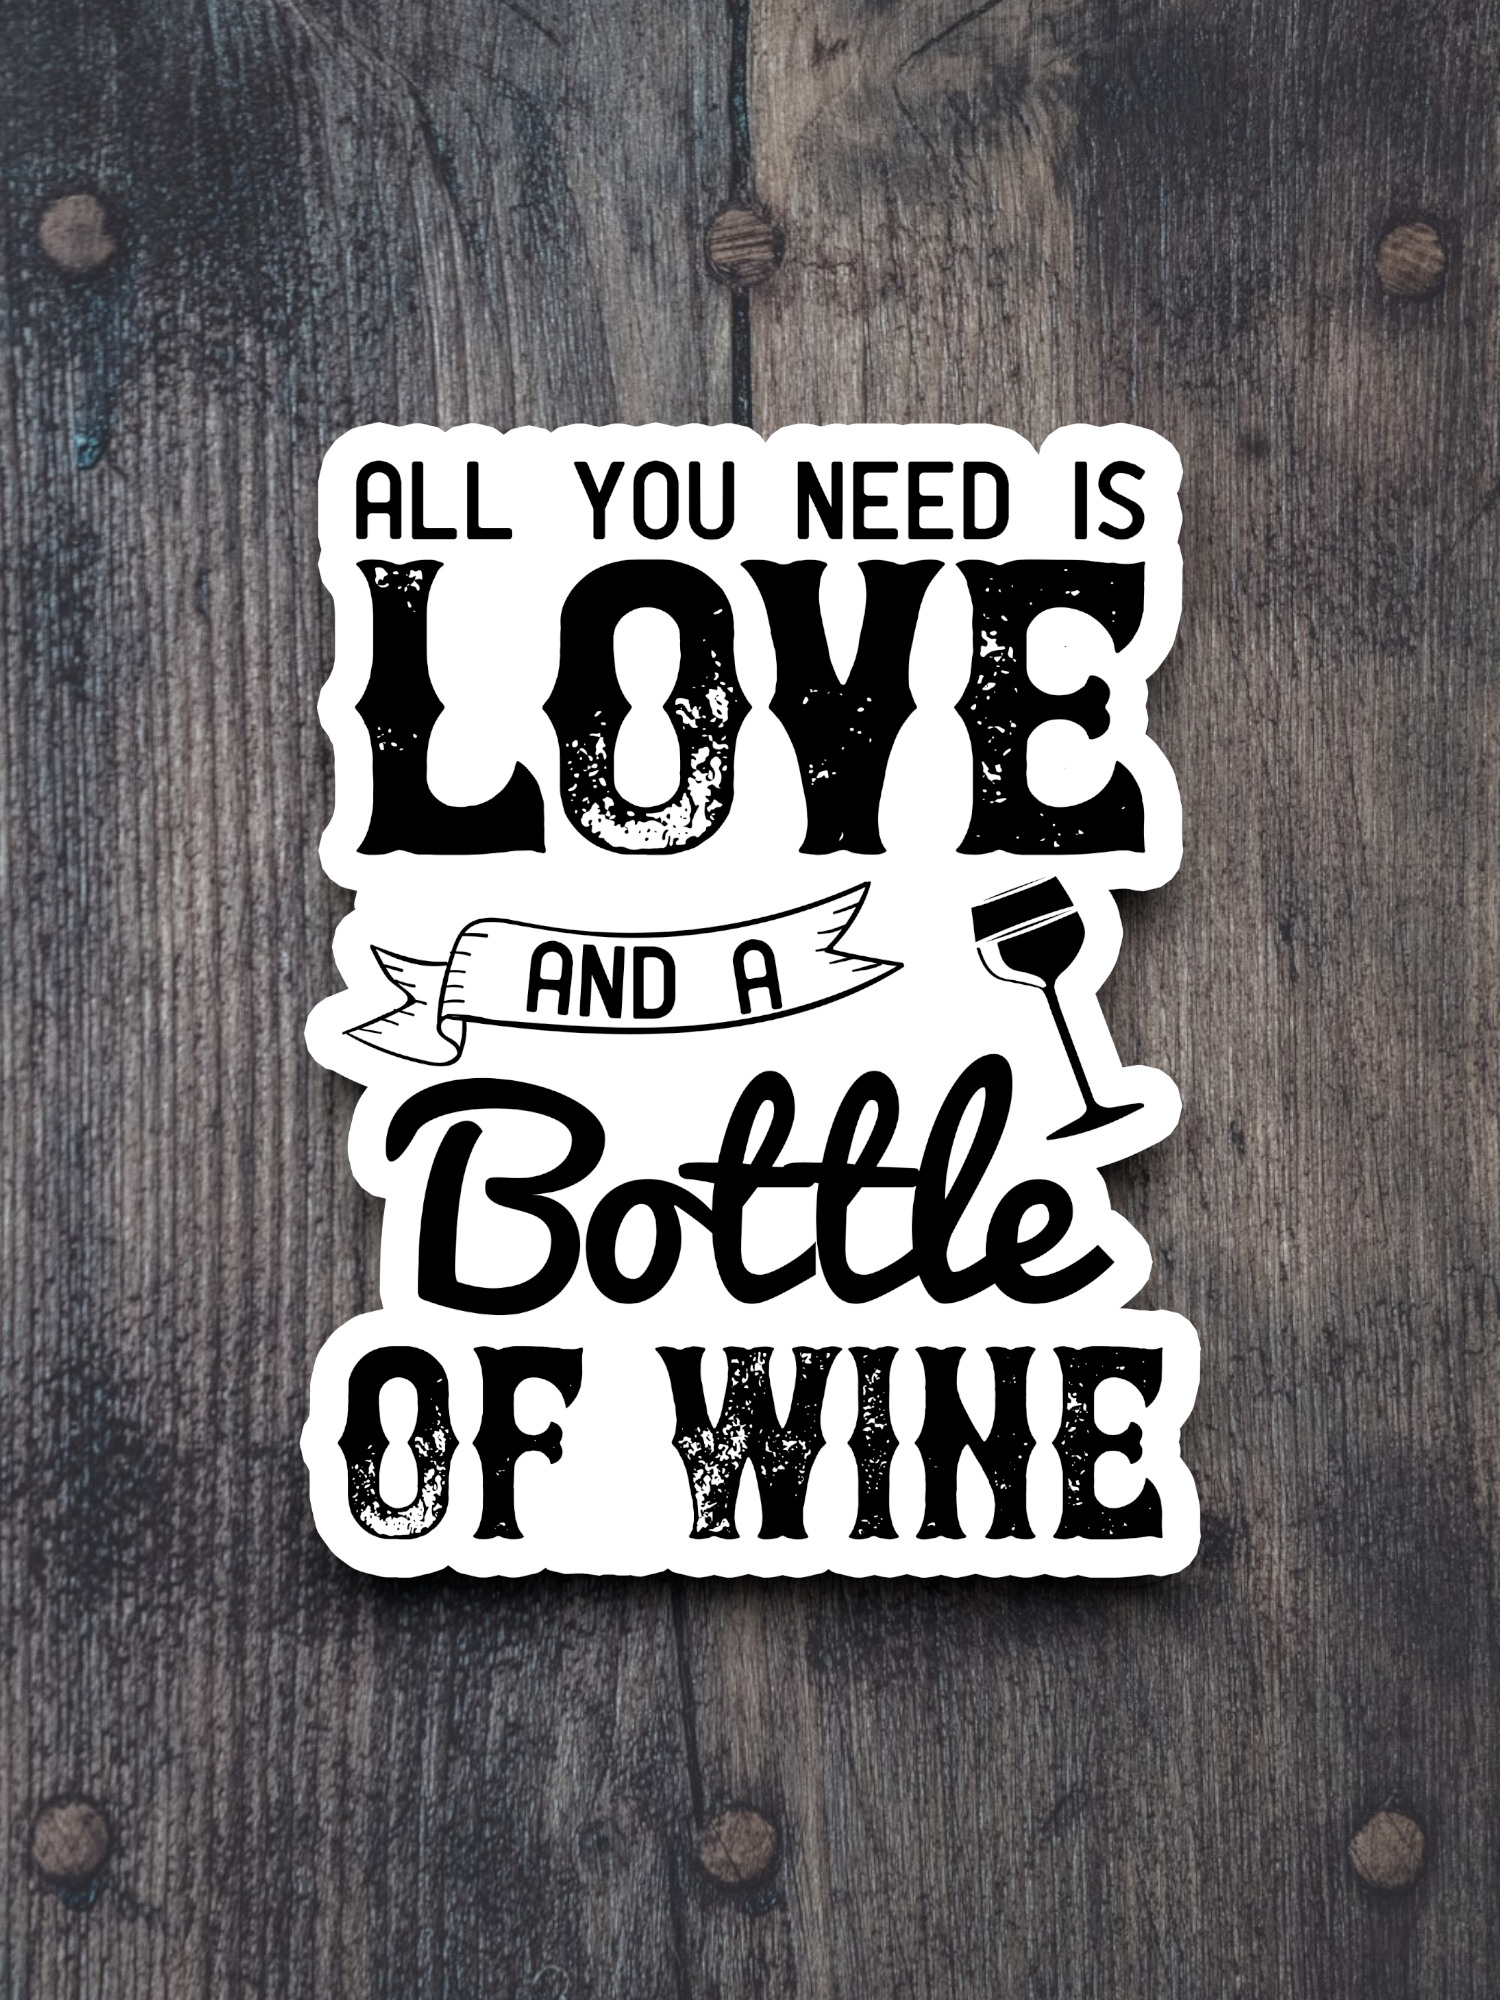 All You Need Is Love And A Bottle Of Wine Sticker